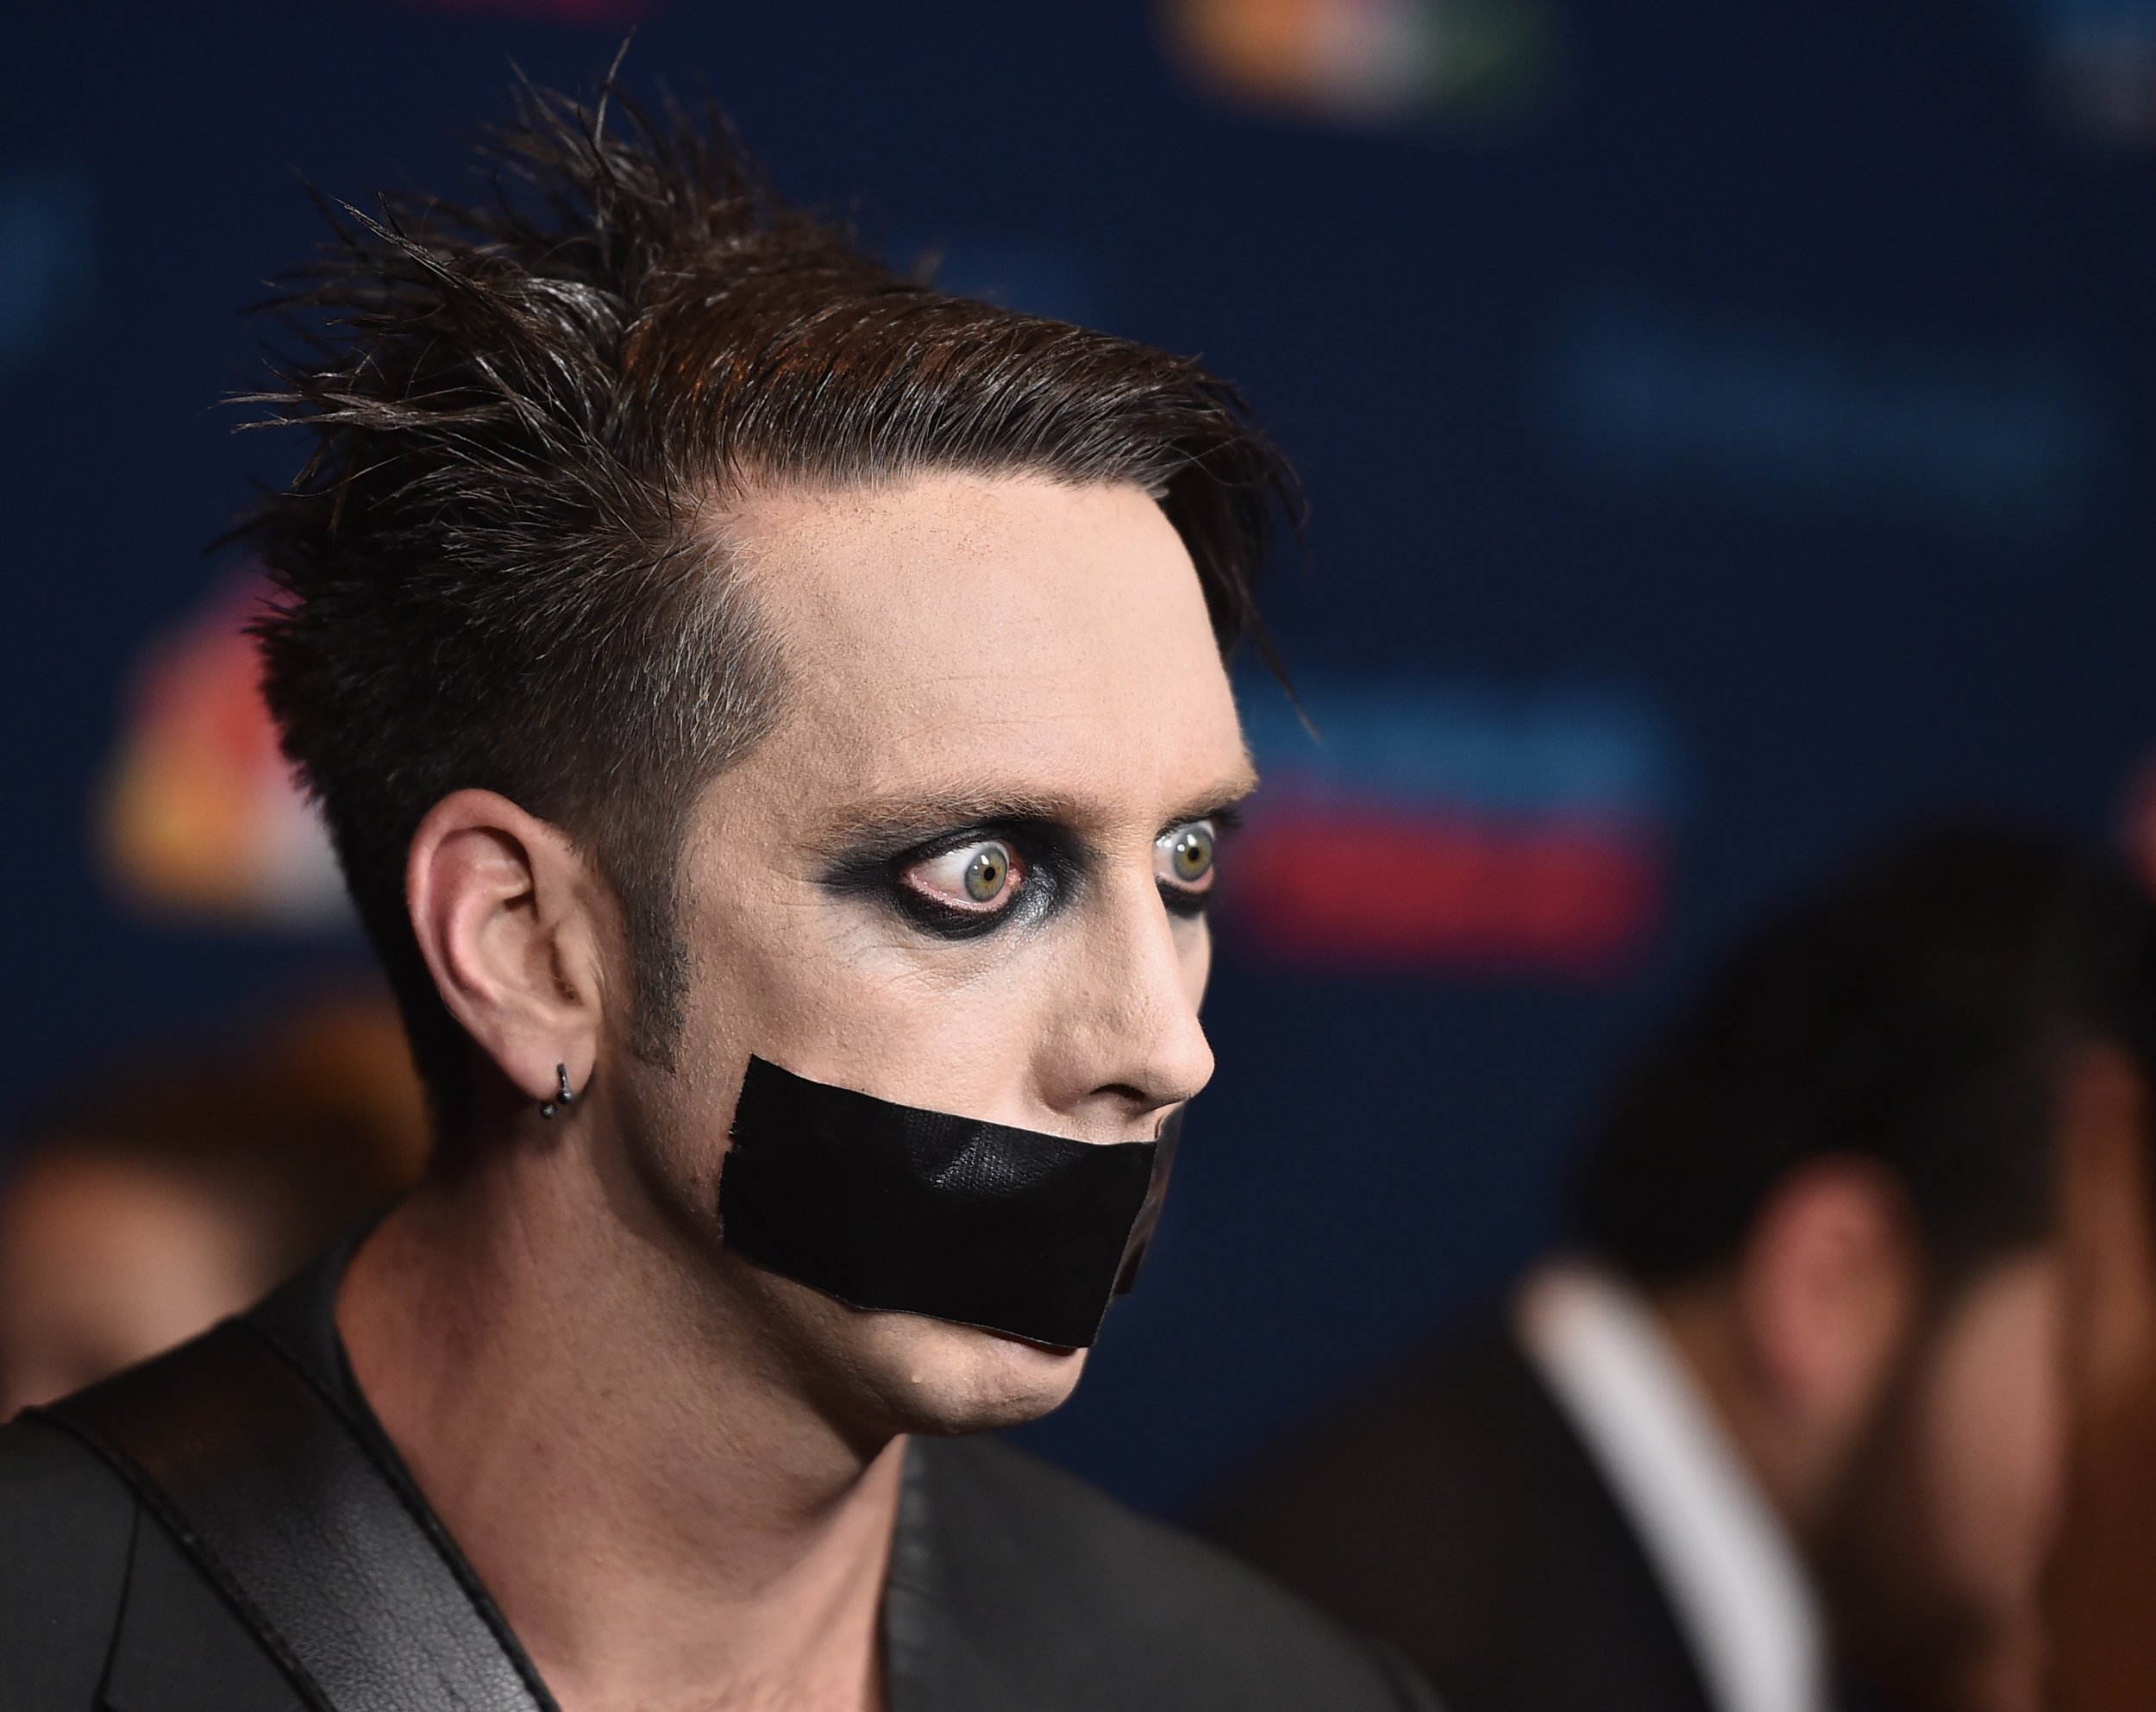 Who Is Tape Face? New Zealand Comic to 'Got Talent' Stage and Brings His Golden Buzzer